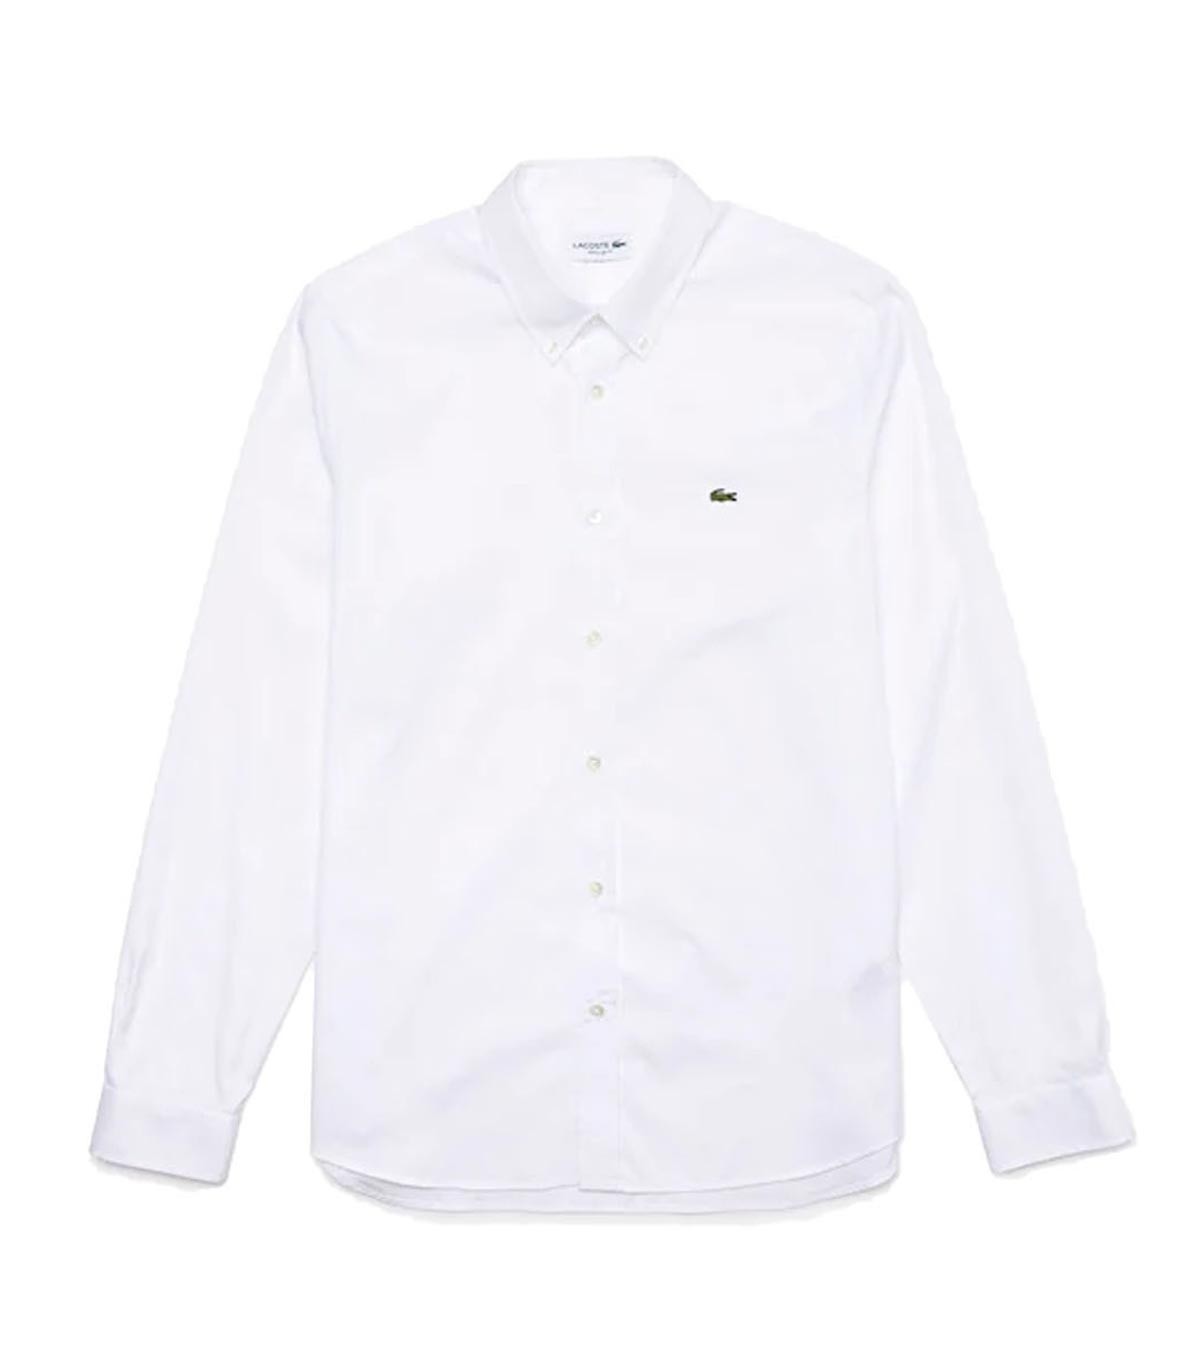 Lacoste - Camisa Chemise Casual - Blanco